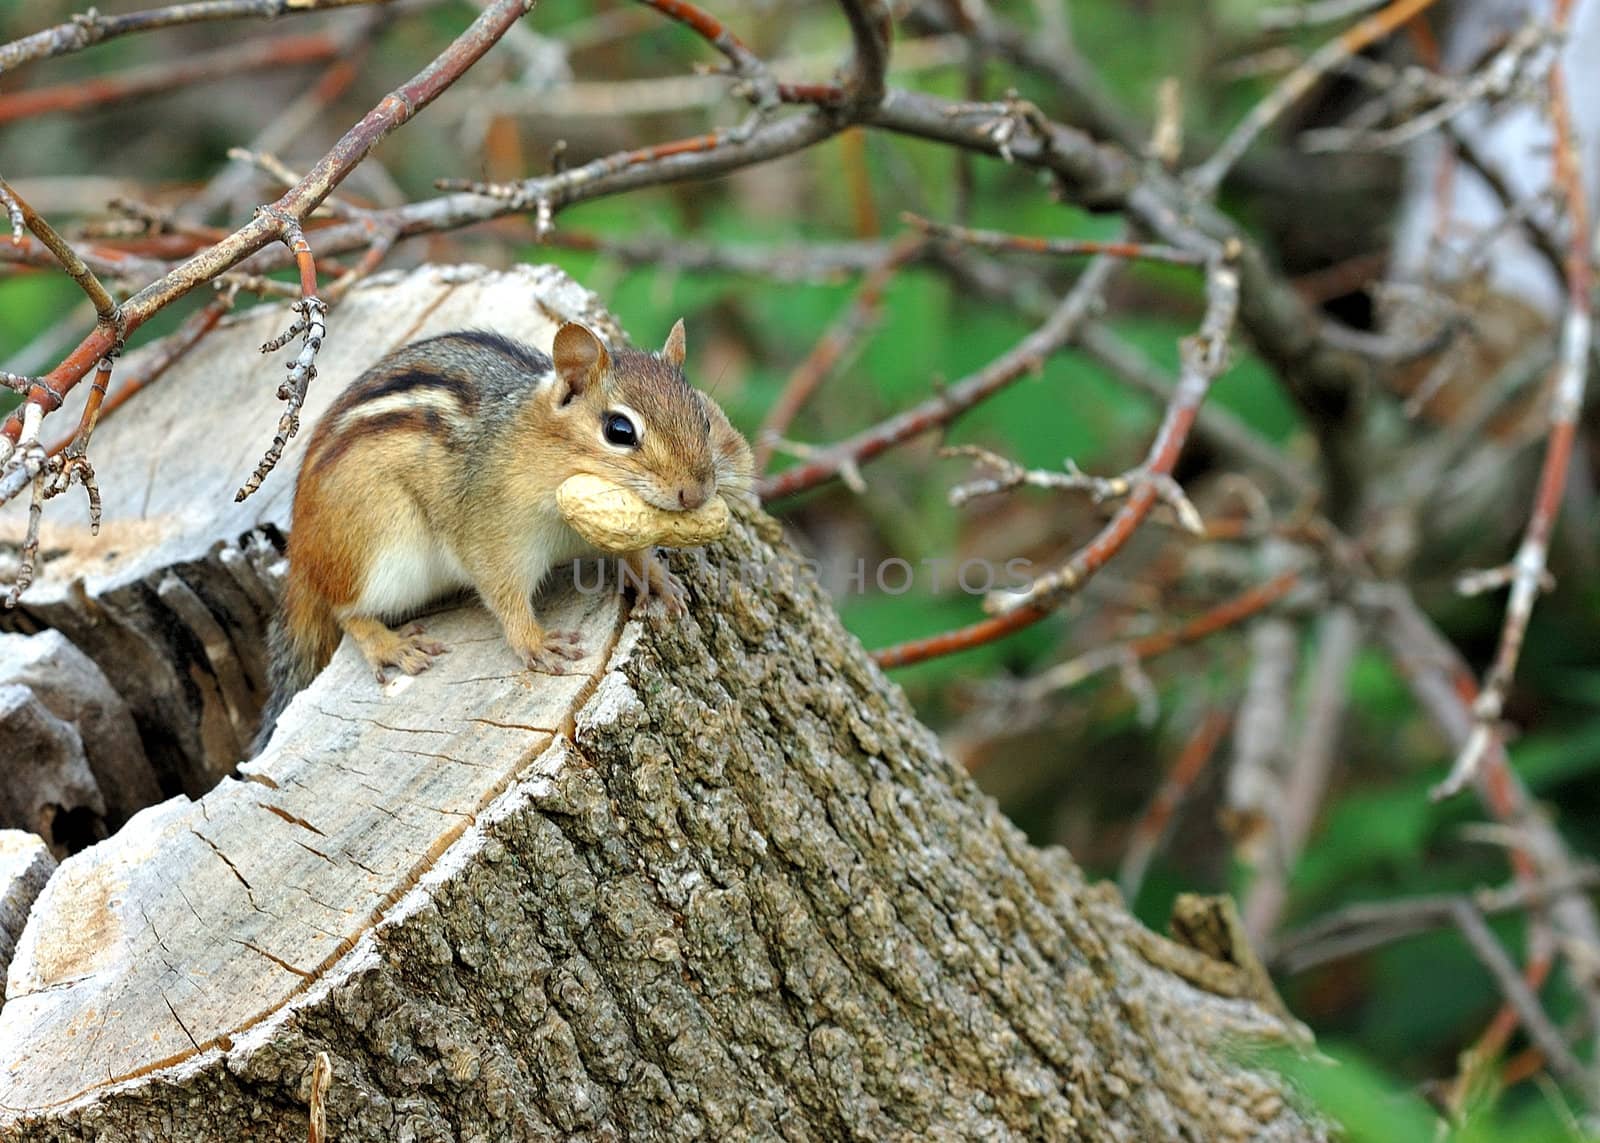 An eastern chipmunk perched on a log with a peanut in his mouth.